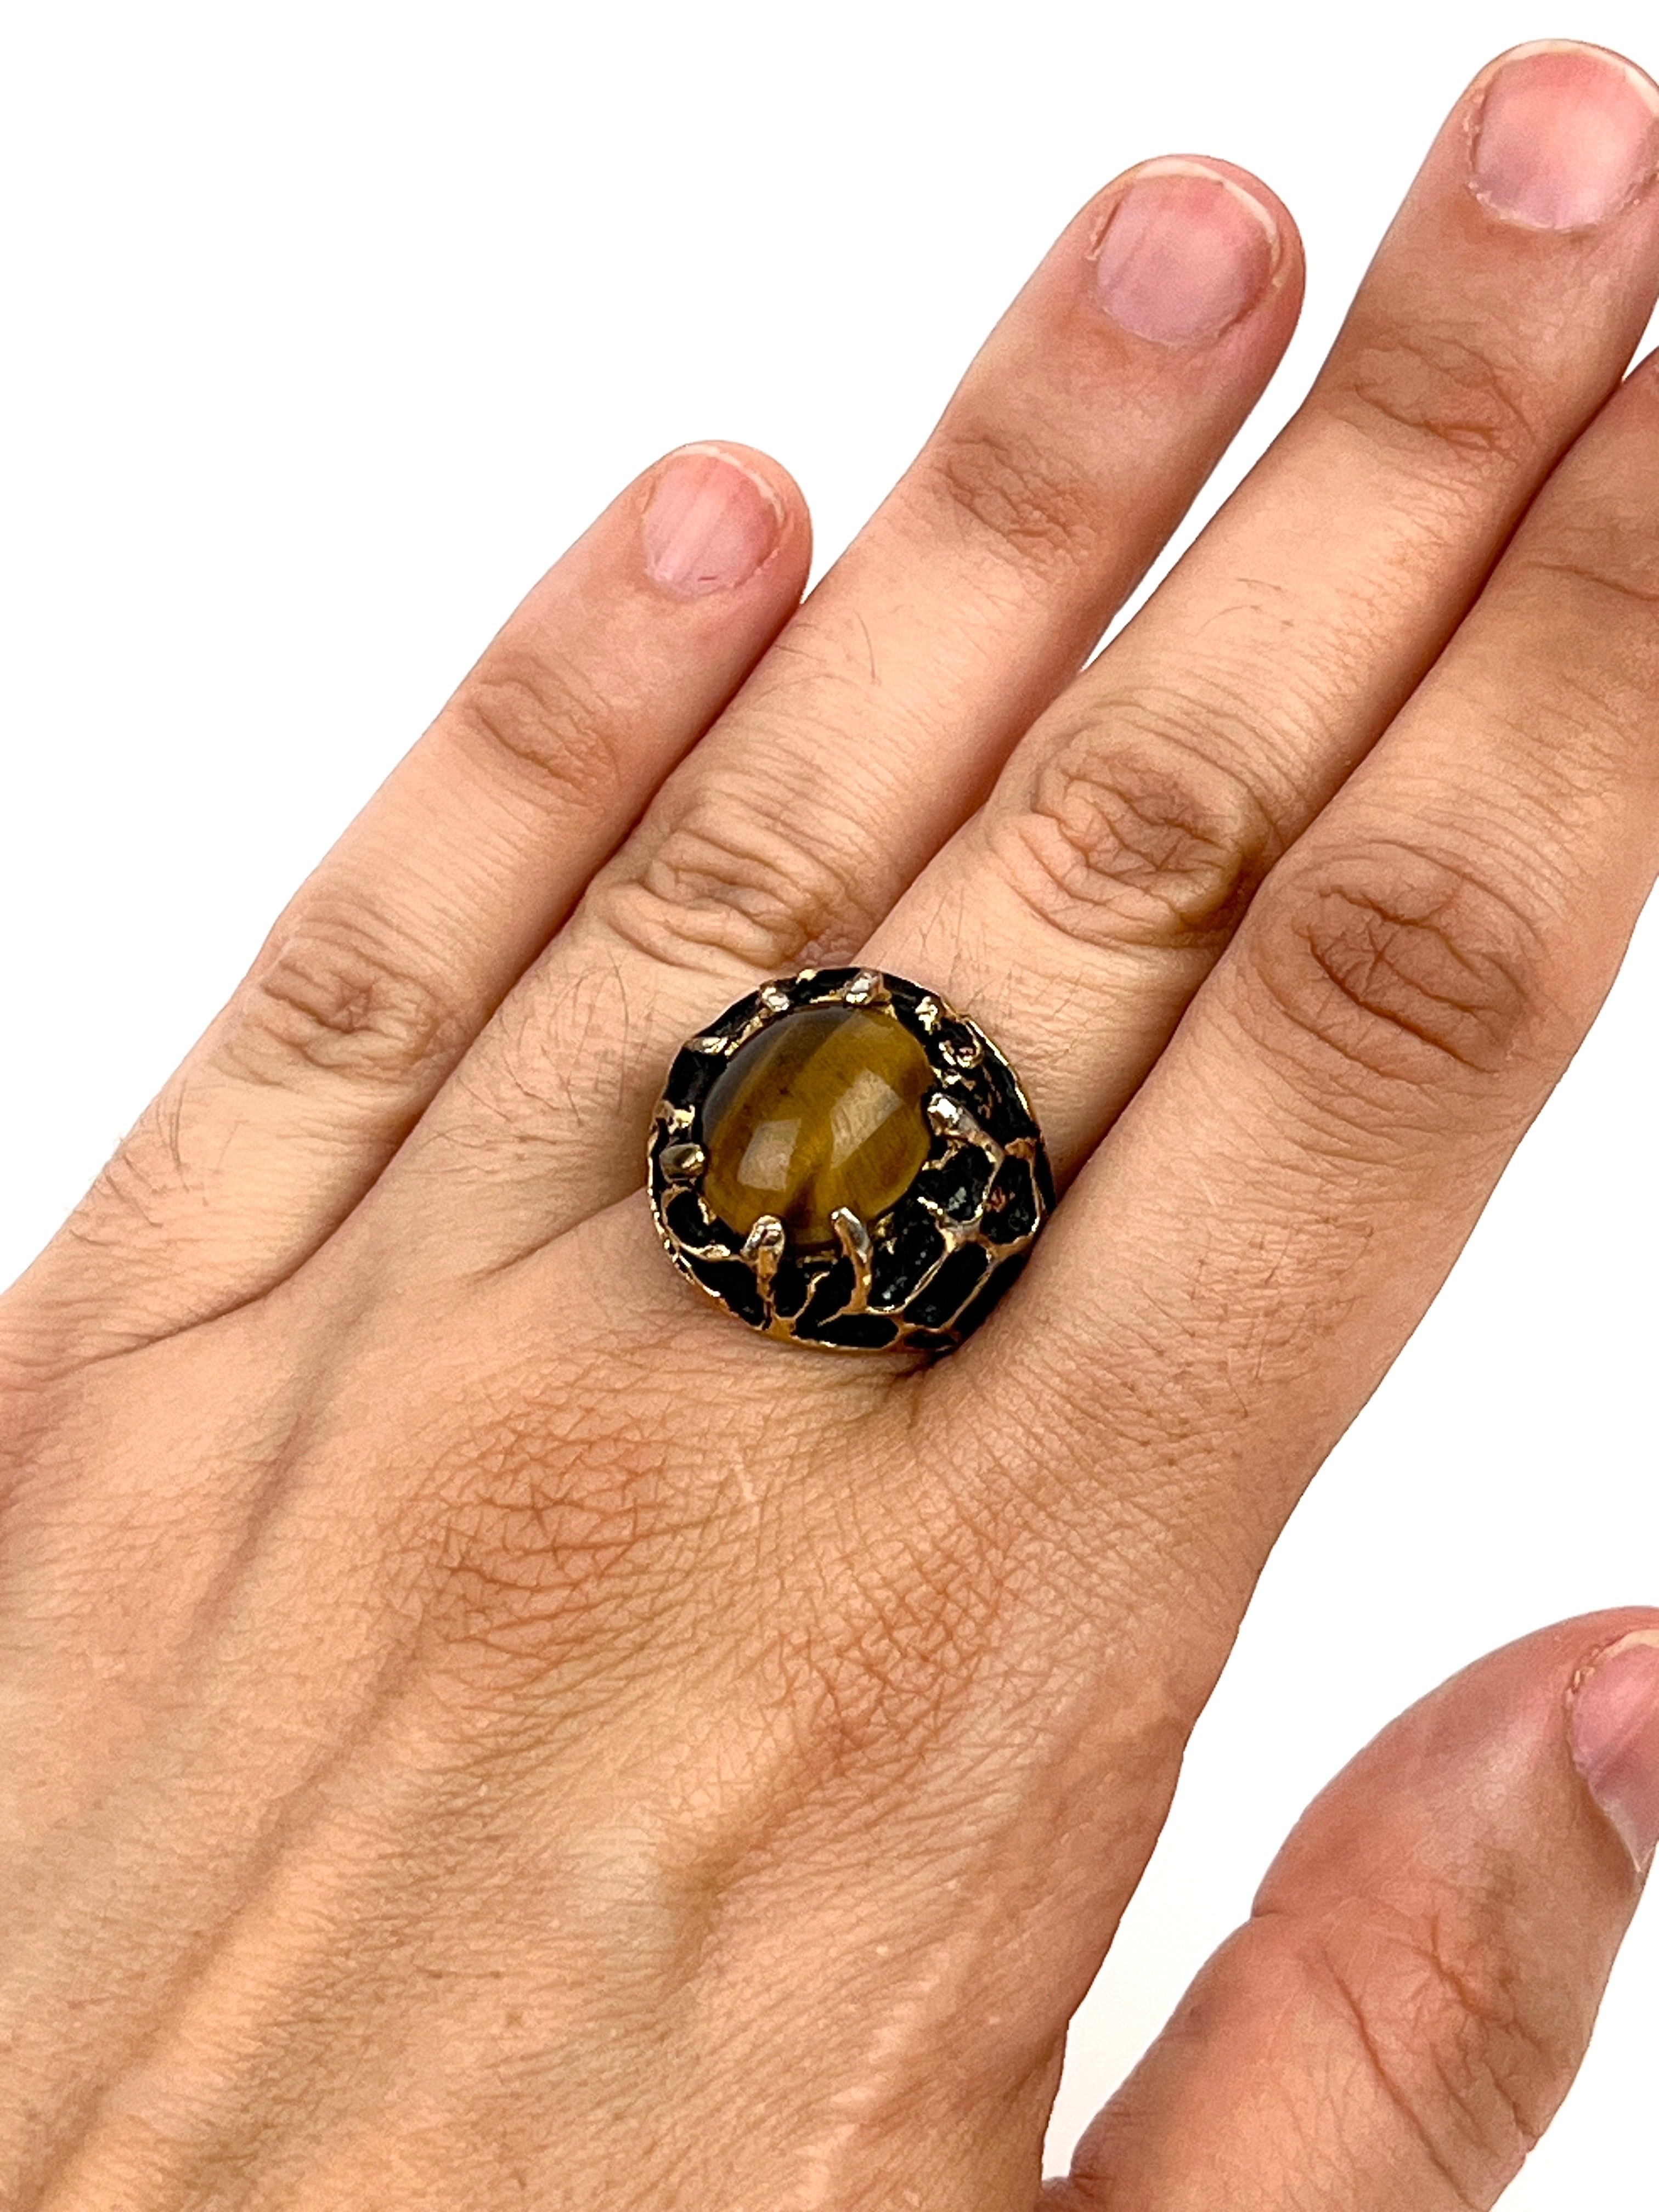 Tiger Eye Stone Color|925 Sterling Silver Tiger Eye Stone Ring - Fashion  Flower Band For Women